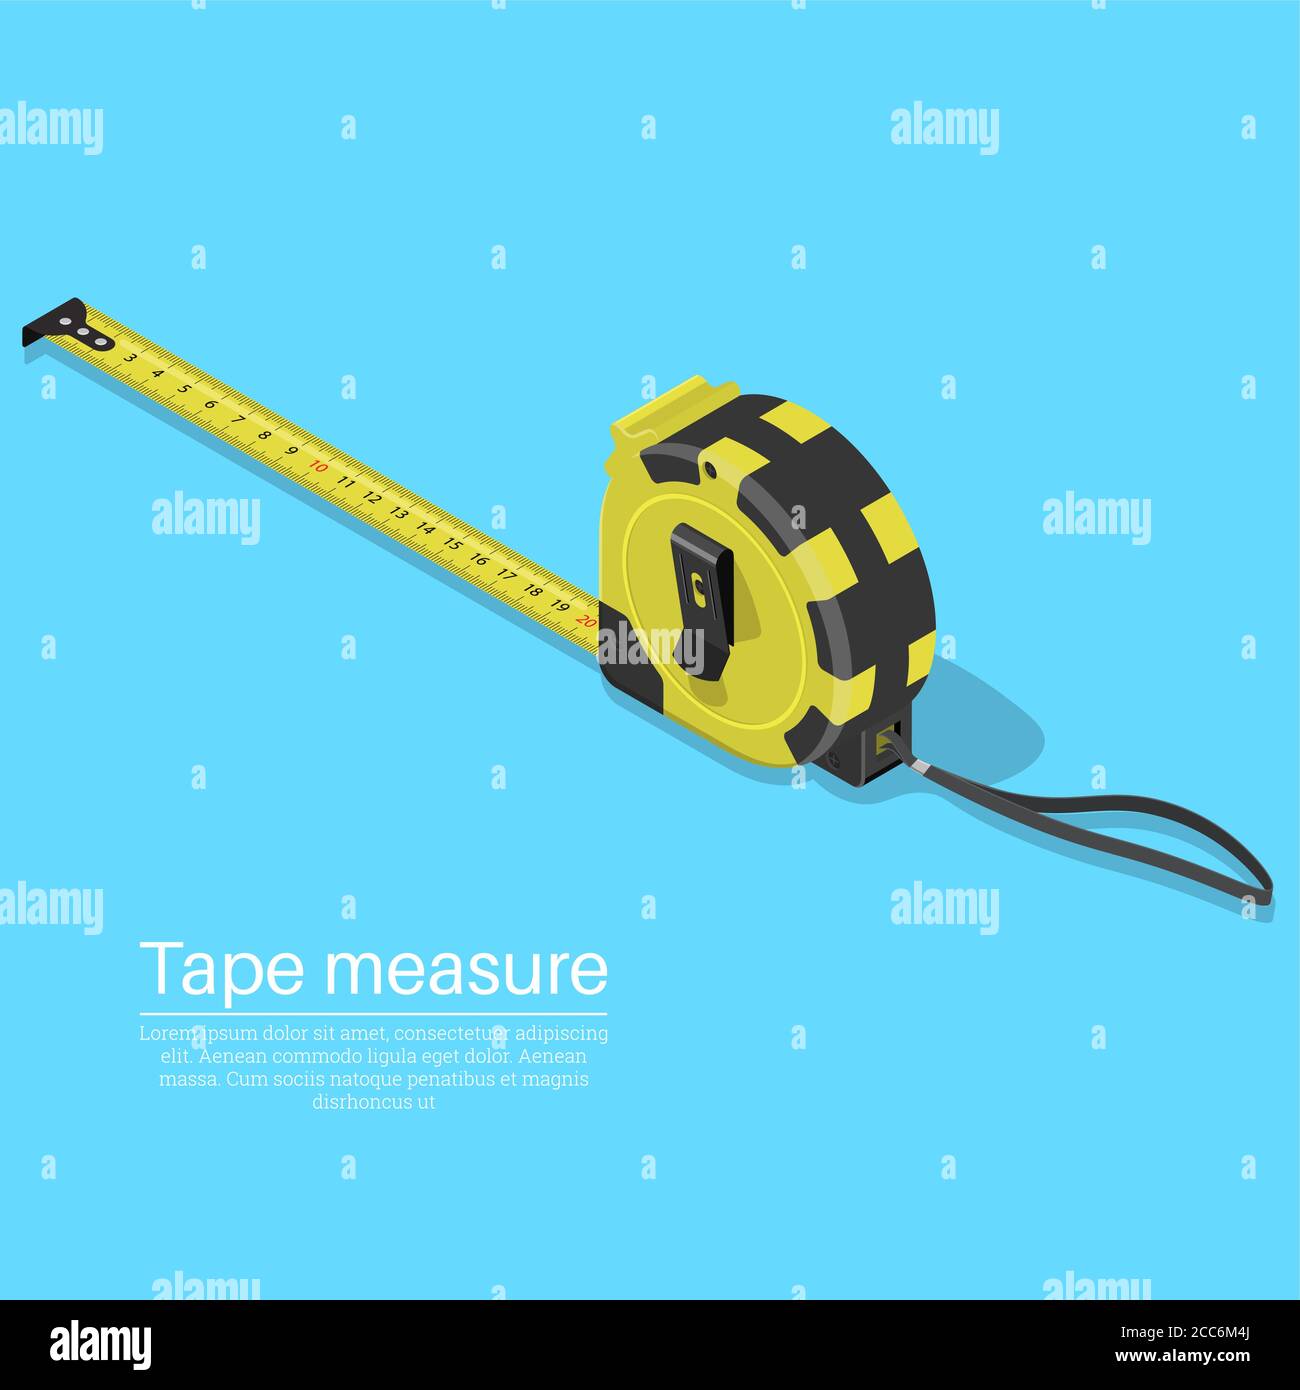 https://c8.alamy.com/comp/2CC6M4J/construction-roulette-with-a-shadow-the-realistic-tool-for-measurement3d-isometry-the-isolated-element-for-design-a-vector-illustration-in-flat-s-2CC6M4J.jpg